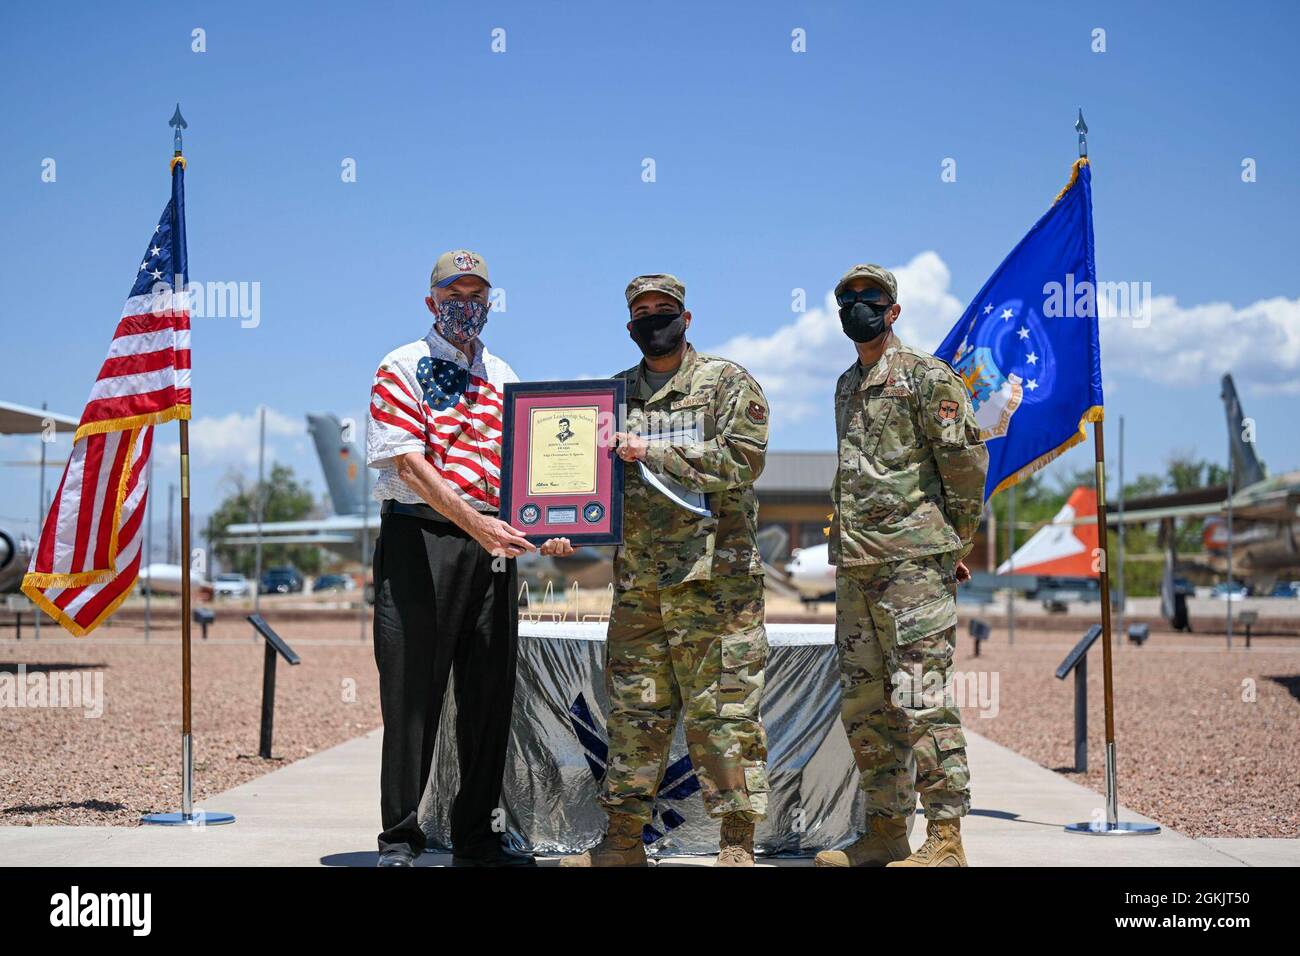 Staff Sgt. Christopher S. Sparks, center, Airman Leadership School graduate, accepts the John L. Levitow award during the graduation of ALS class 21-5, May, 6, 2021, on Holloman Air Force Base, New Mexico. The John L. Levitow award is presented to the student demonstrating the highest level of leadership and scholastic performance, and is determined by the assignment of points by their peers. Stock Photo